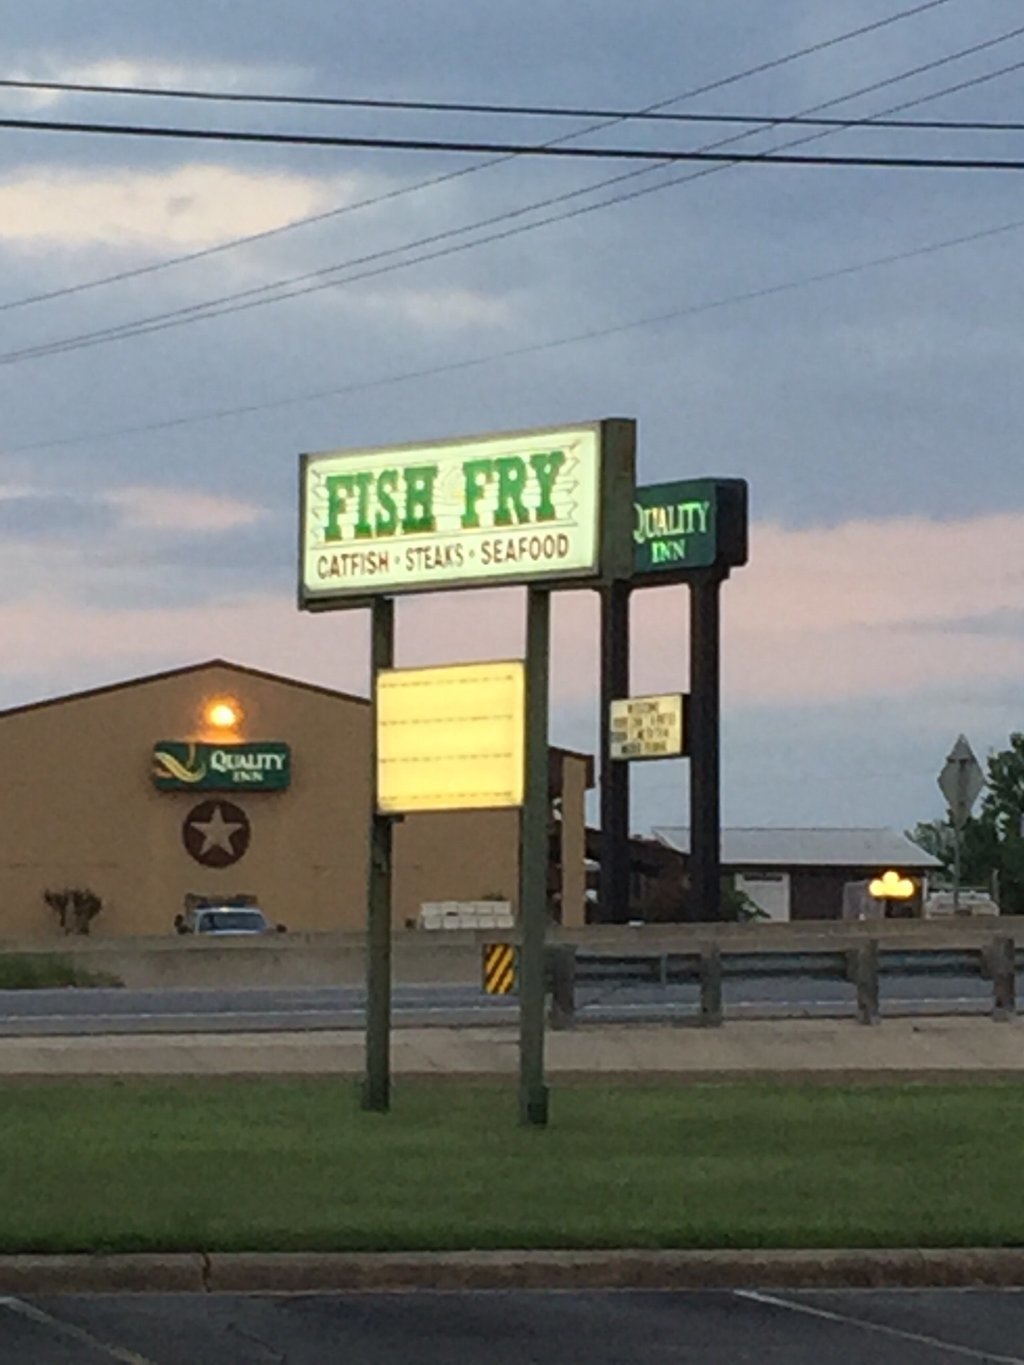 The Fish Fry